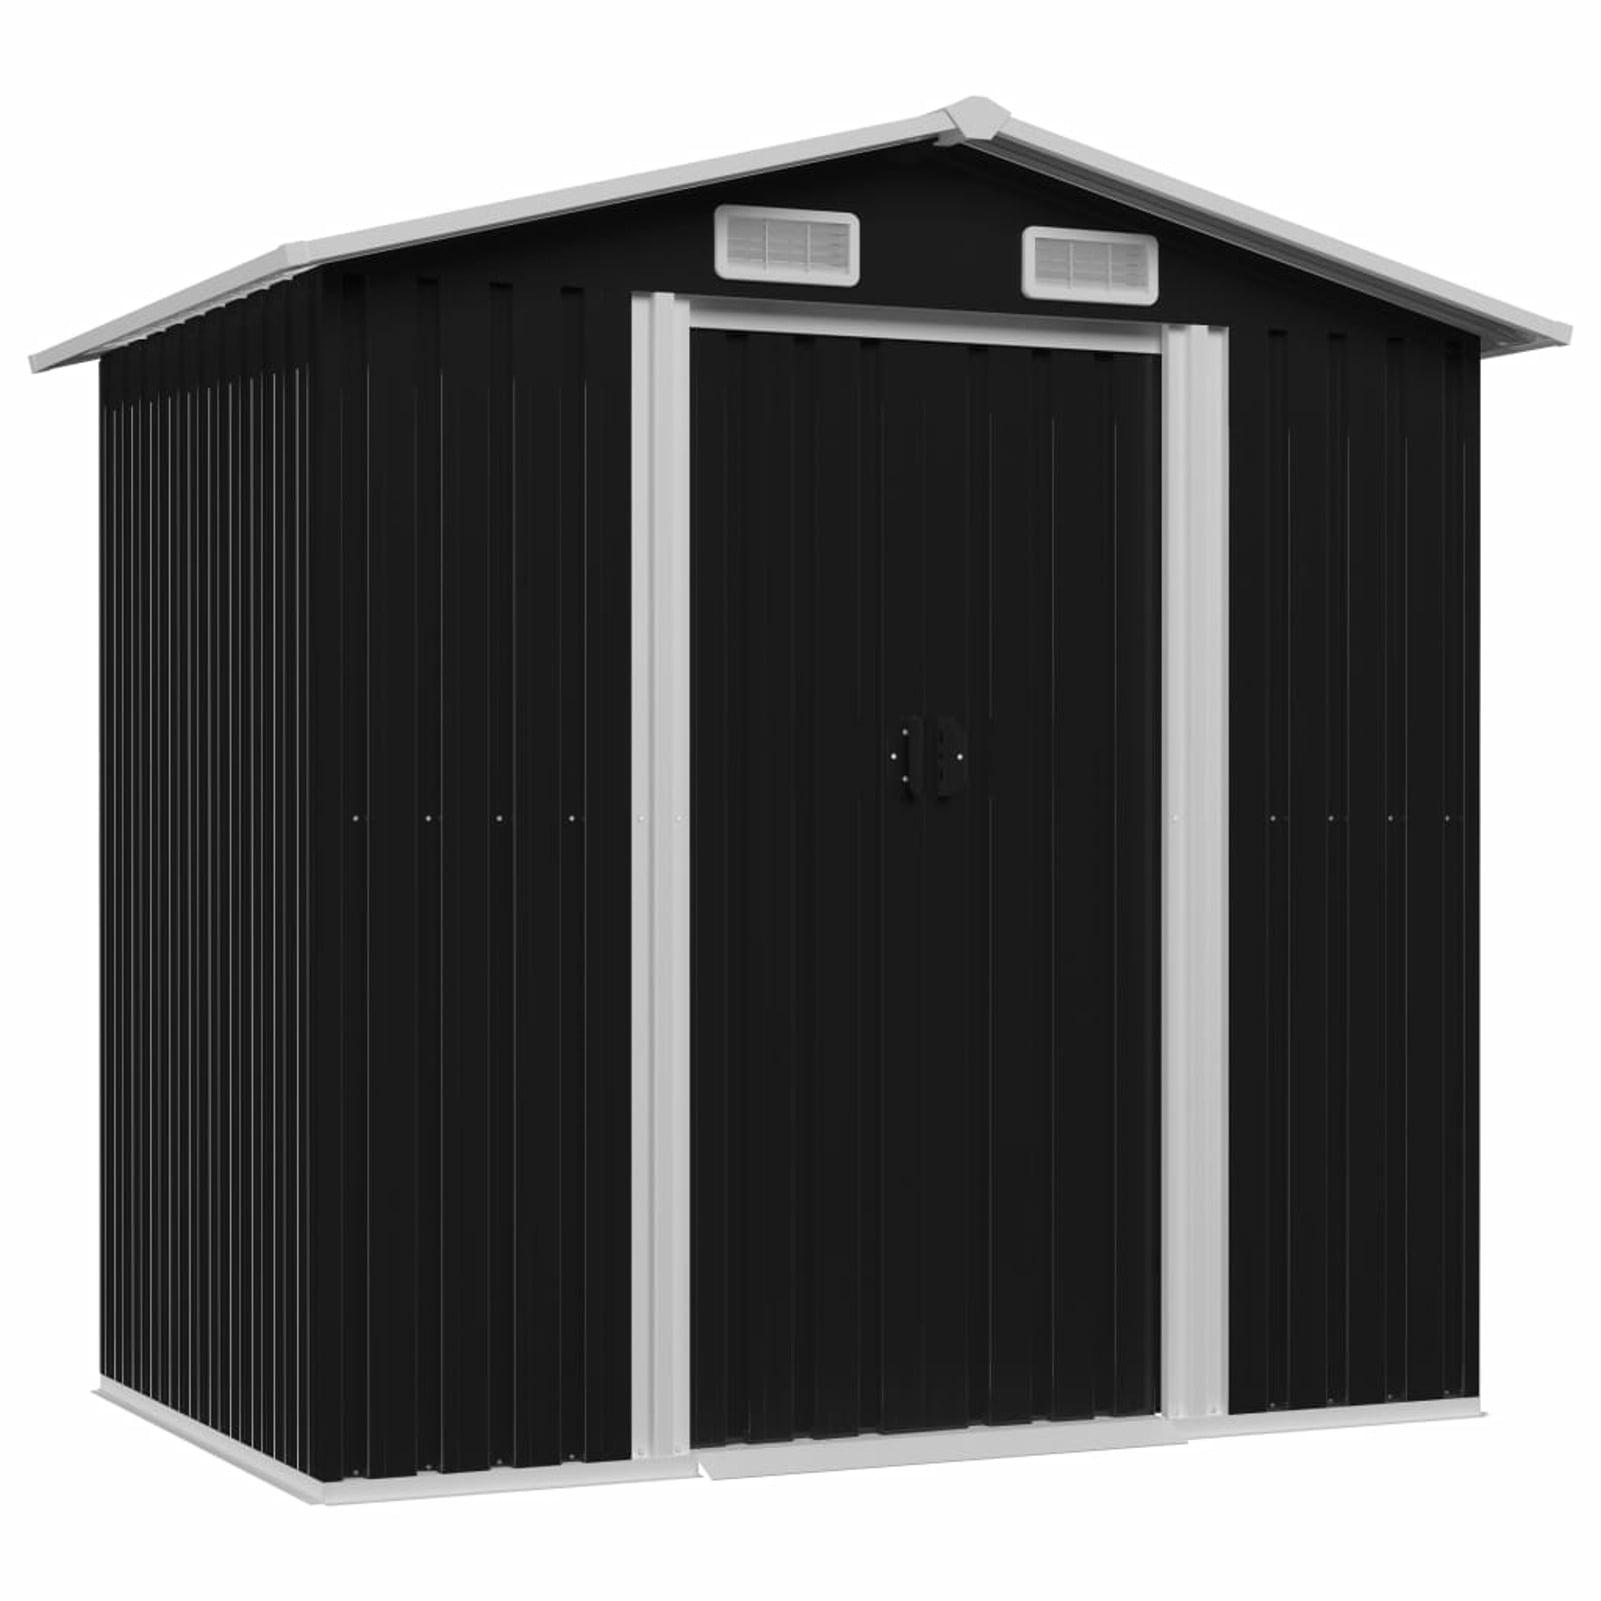 Anthracite Steel Garden Storage Shed 80.3"x52"x73.2" with Double Sliding Doors and 4 Vents